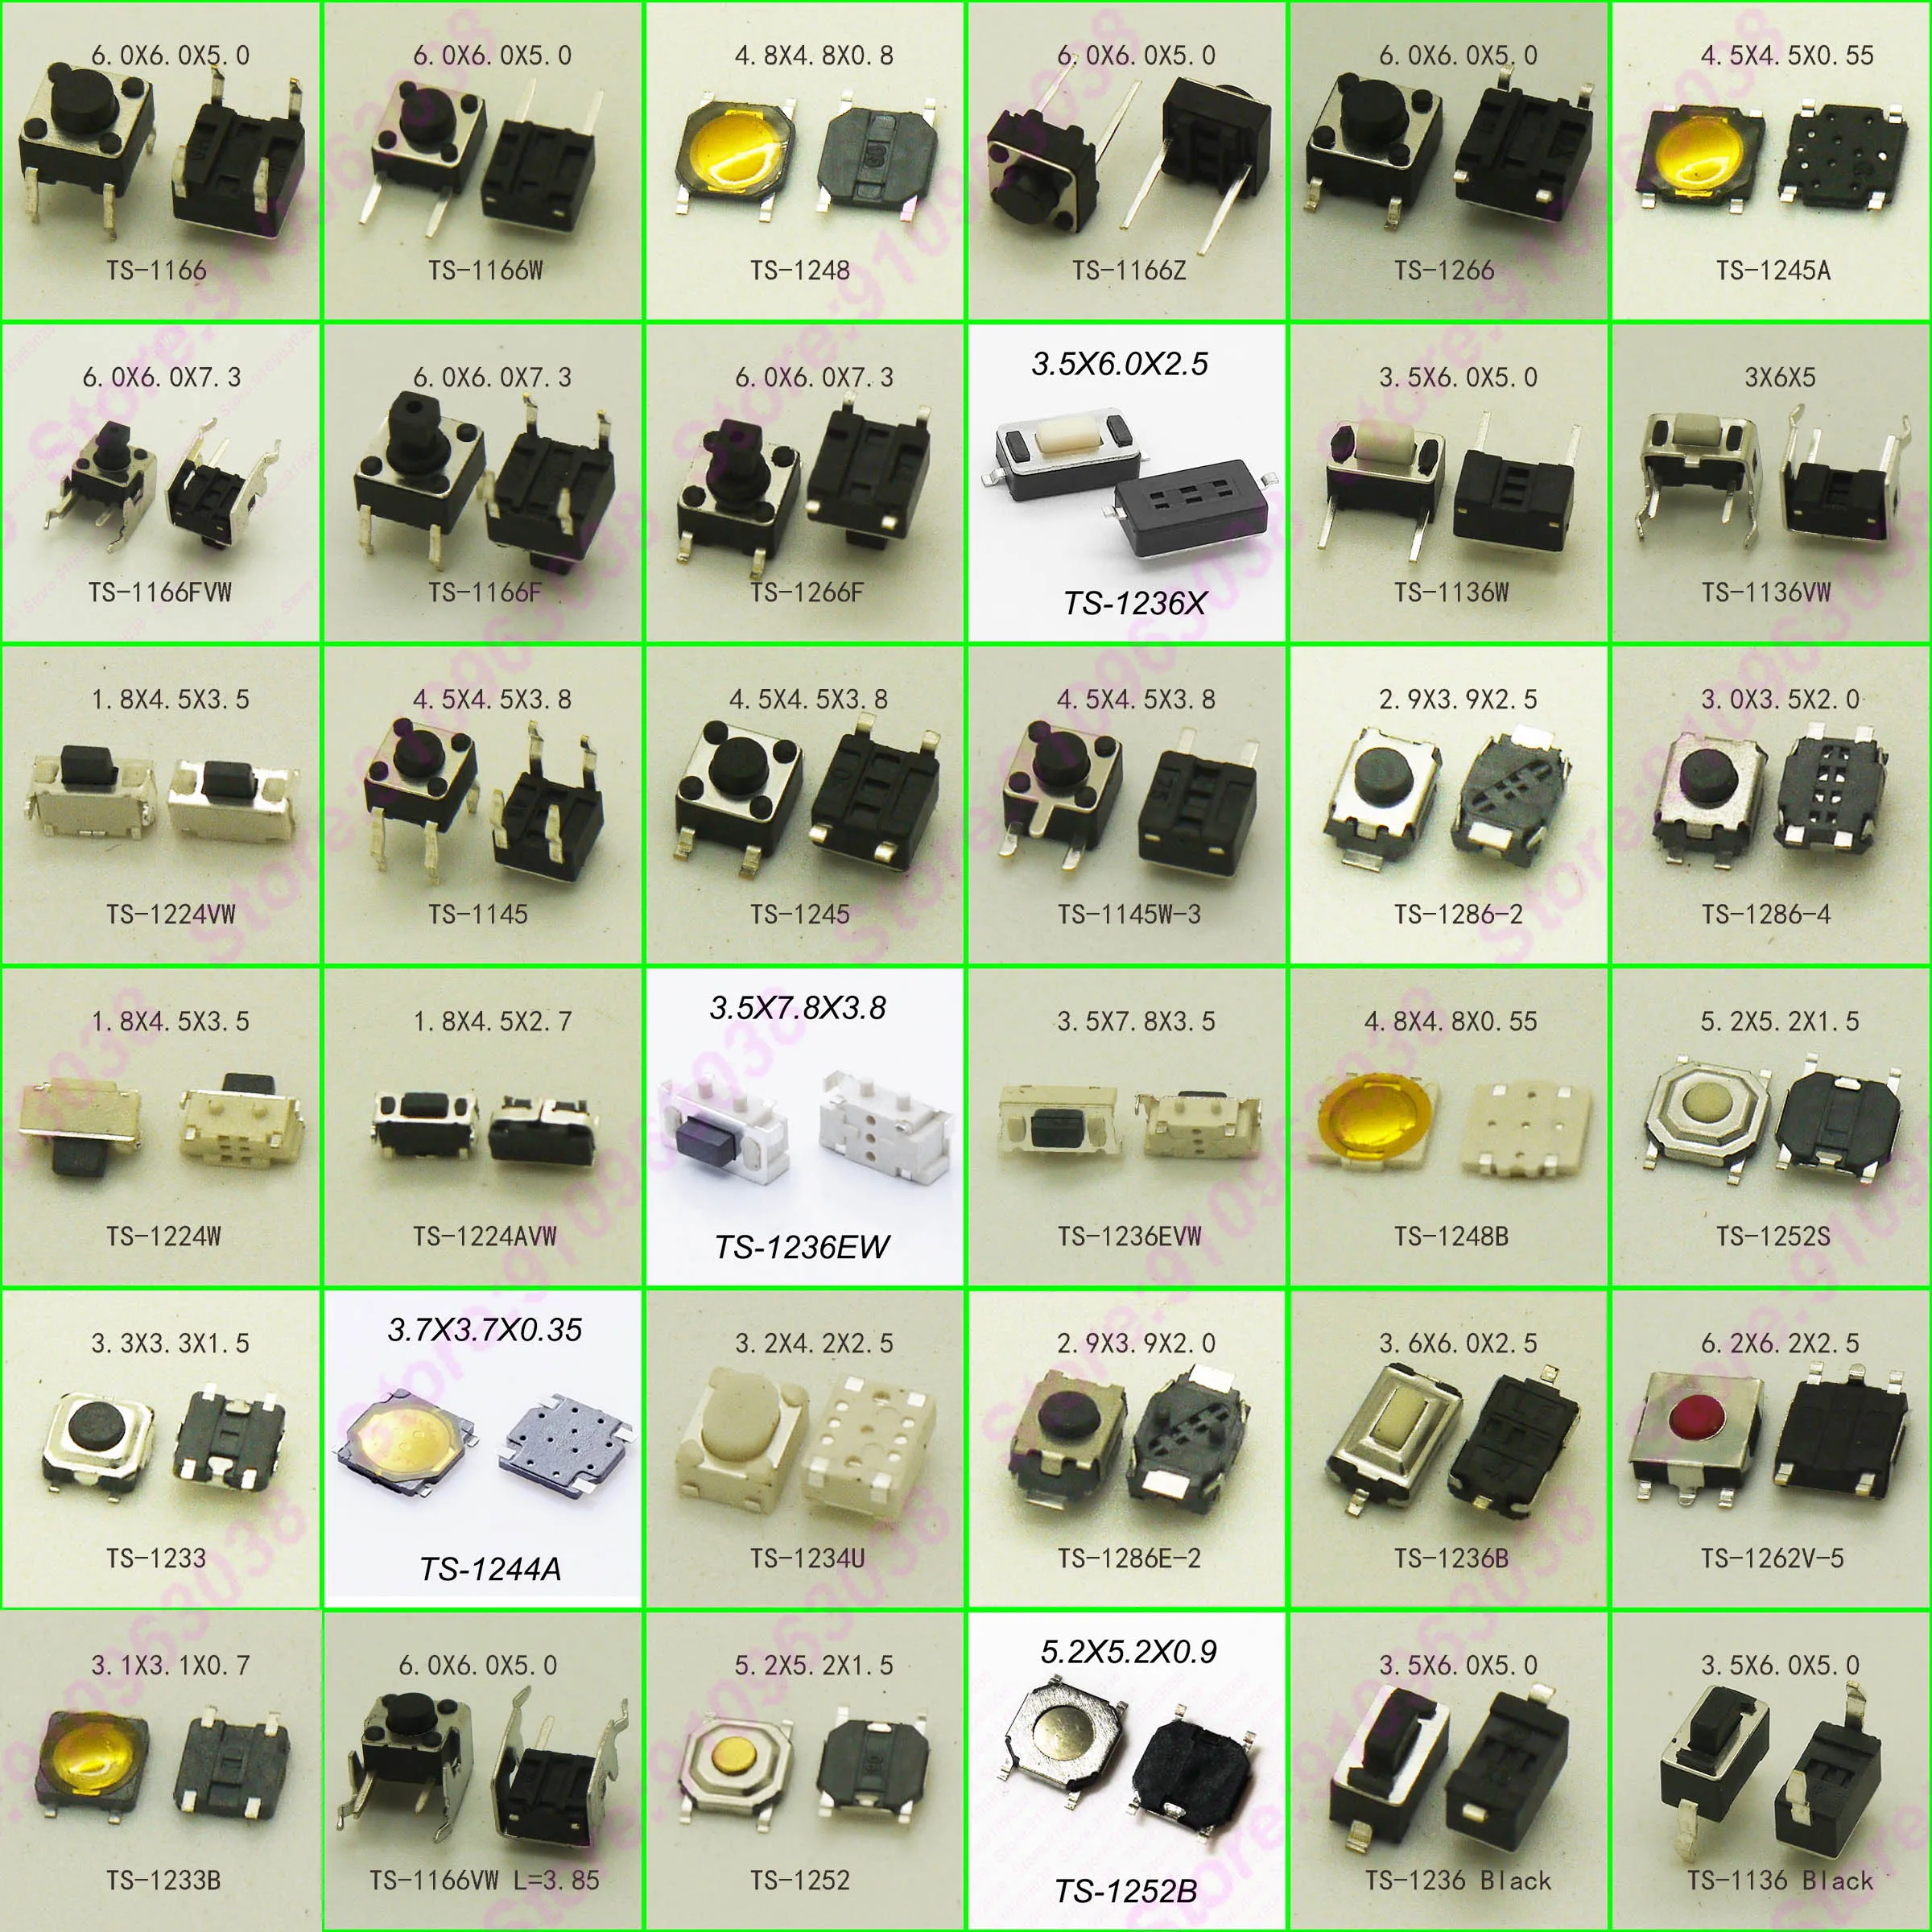 360pieces/36models momentary button Tact button switch push button no locking click button for laptop TV tablet toys key